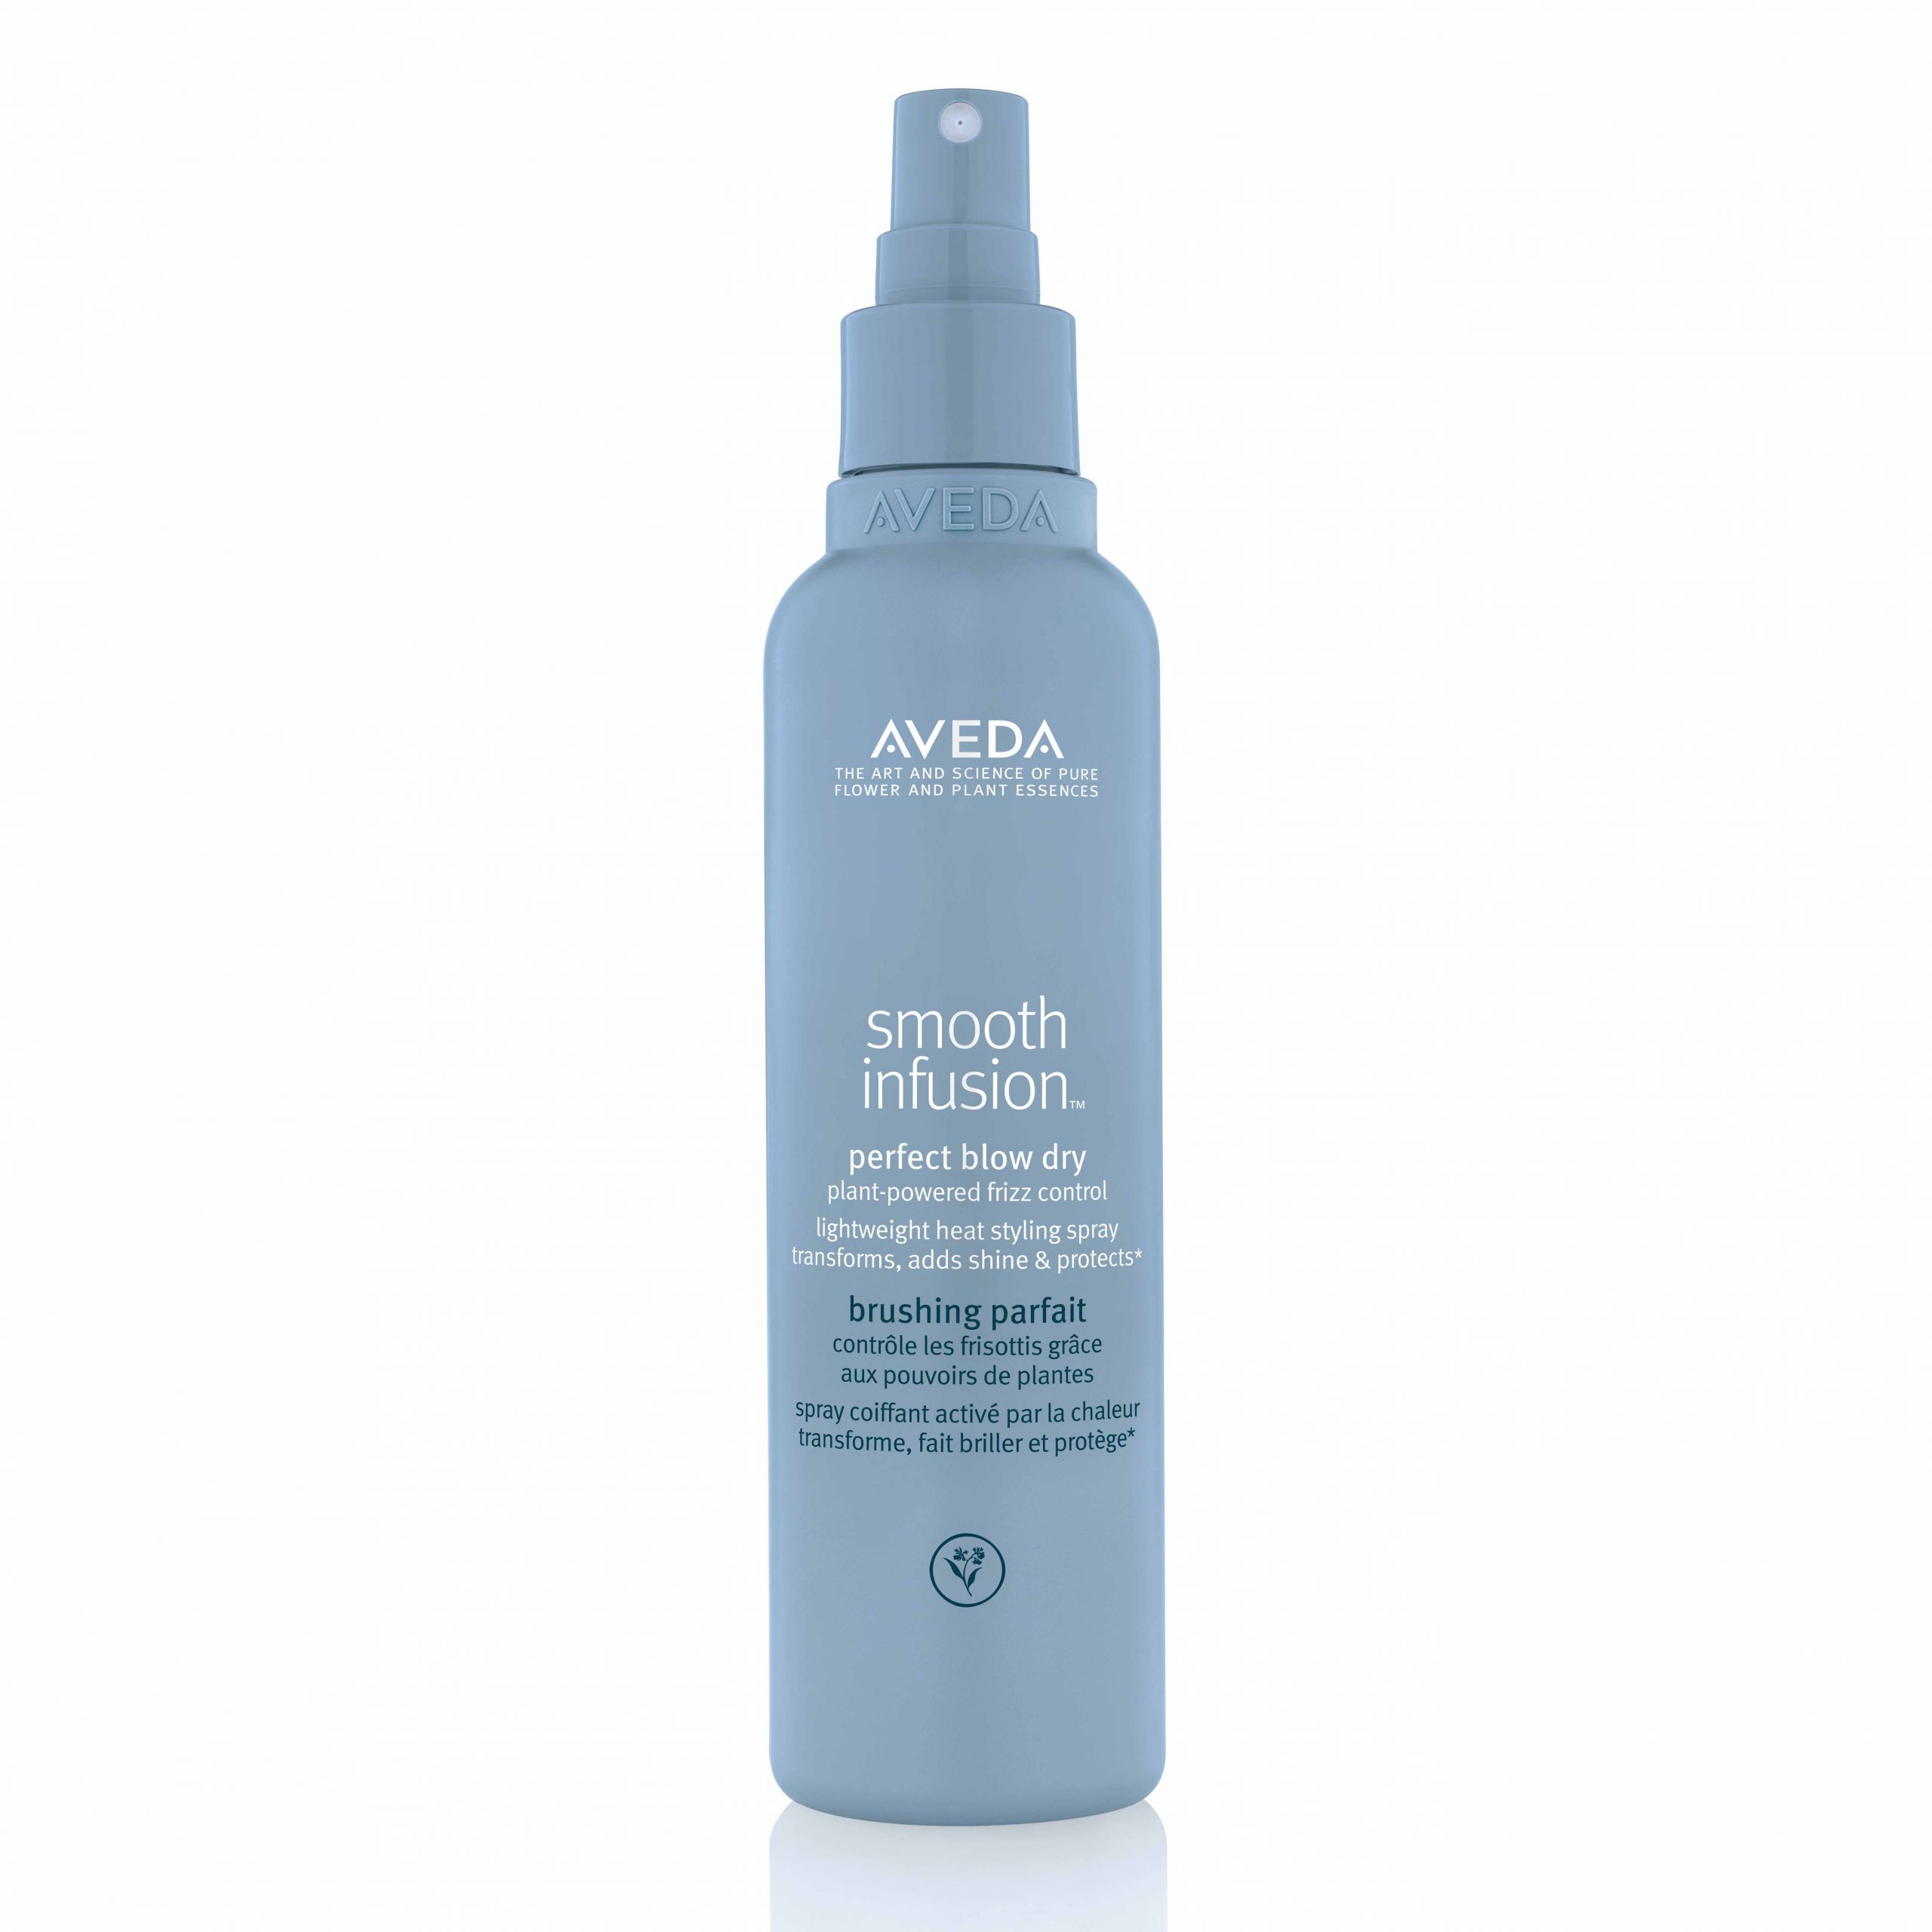 https://av-dashop.nl/wp-content/uploads/2022/07/Aveda-smooth-infusion-perfect-blow-dry-200ml-scaled.jpg